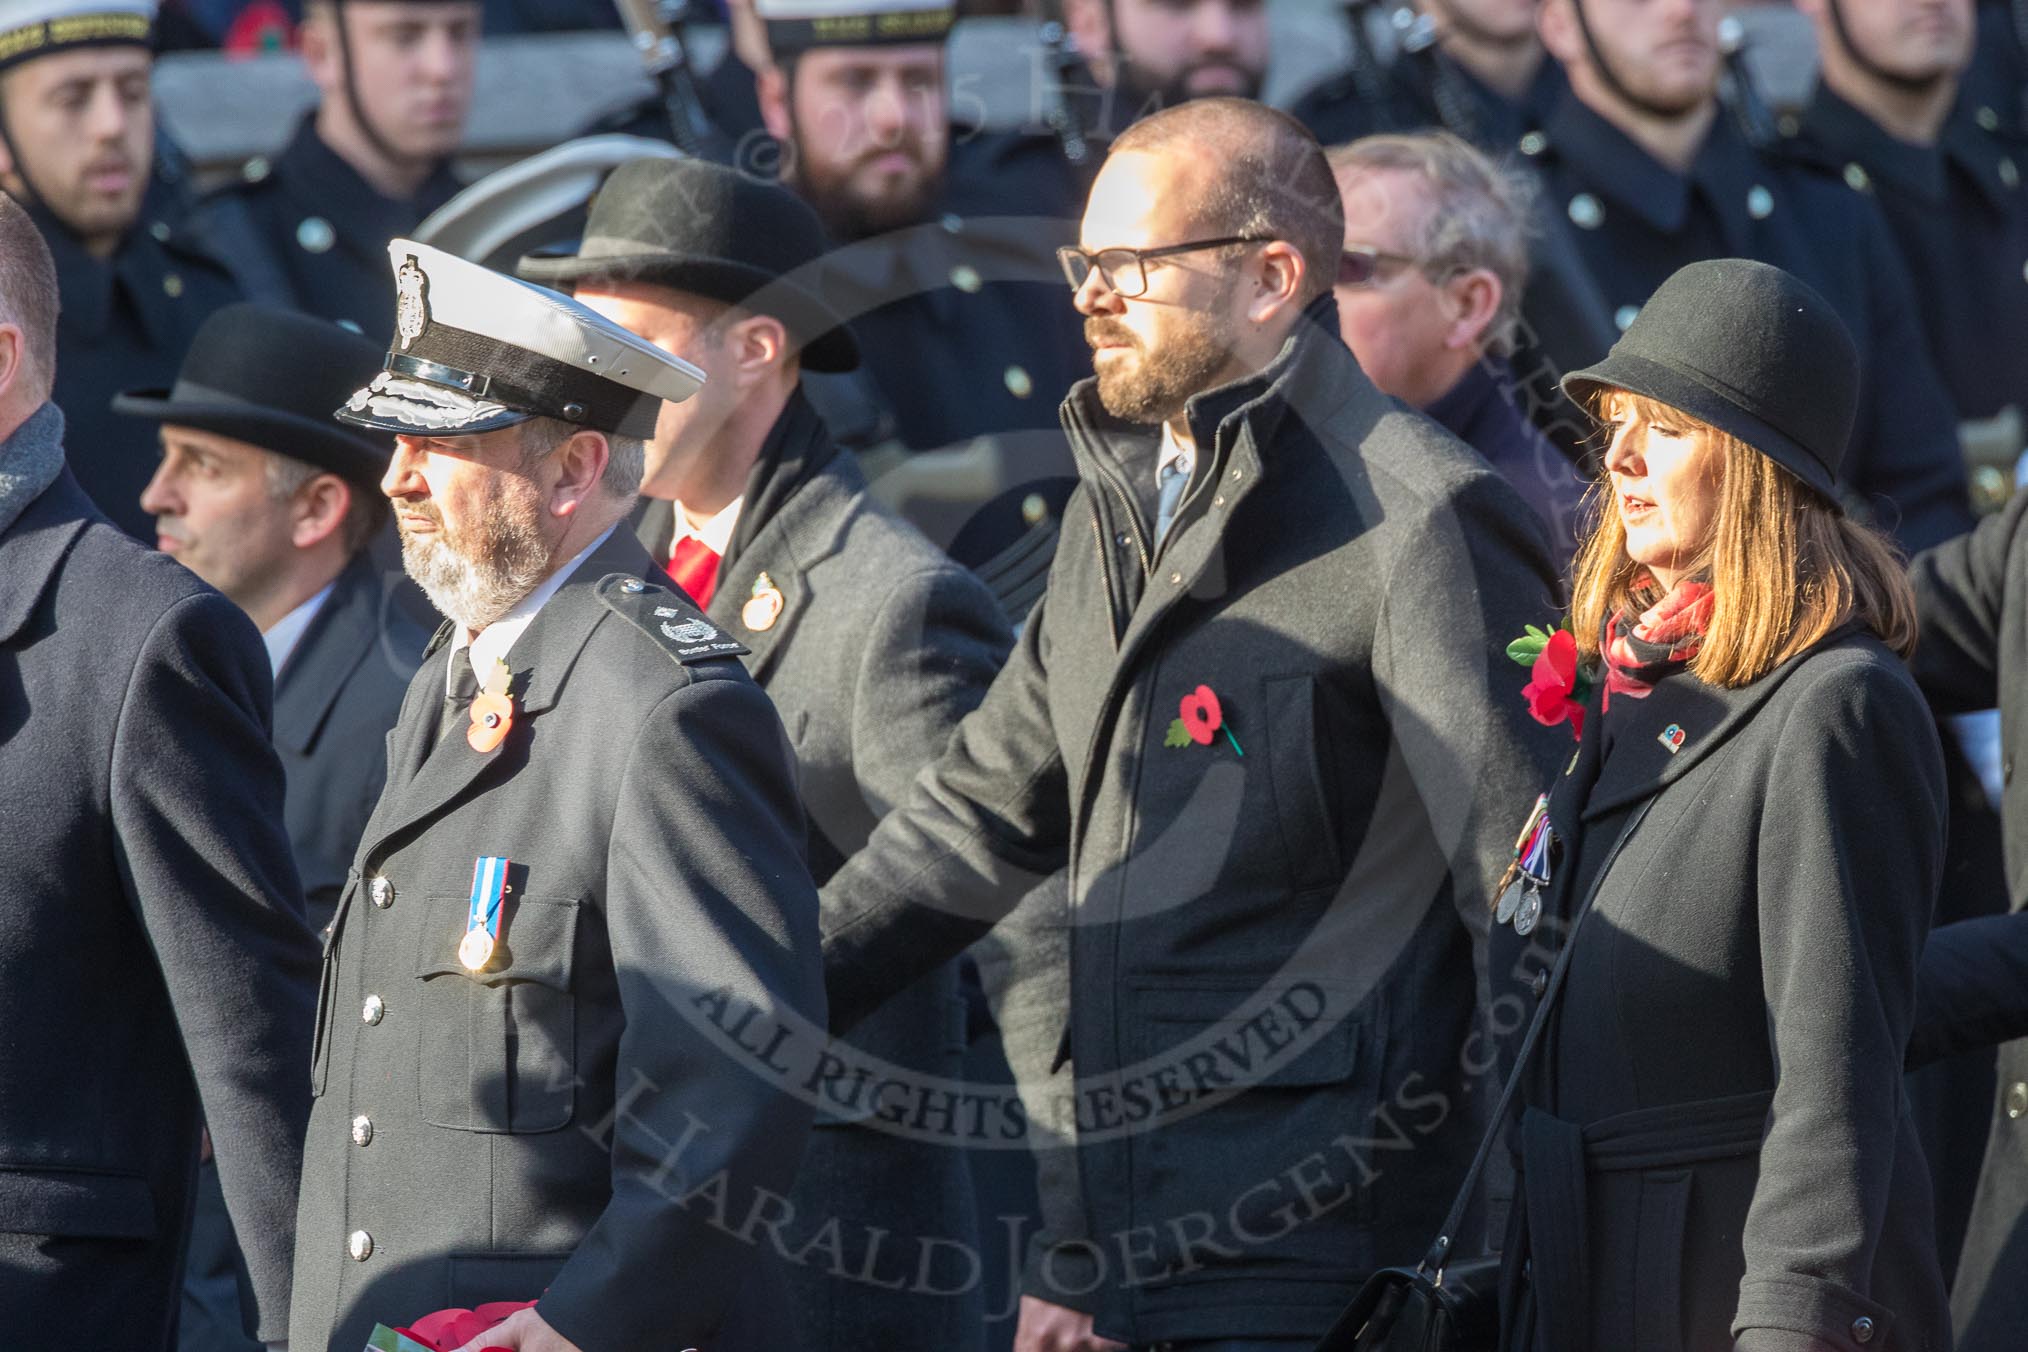 March Past, Remembrance Sunday at the Cenotaph 2016: M52 Munitions Workers Association.
Cenotaph, Whitehall, London SW1,
London,
Greater London,
United Kingdom,
on 13 November 2016 at 13:21, image #3086